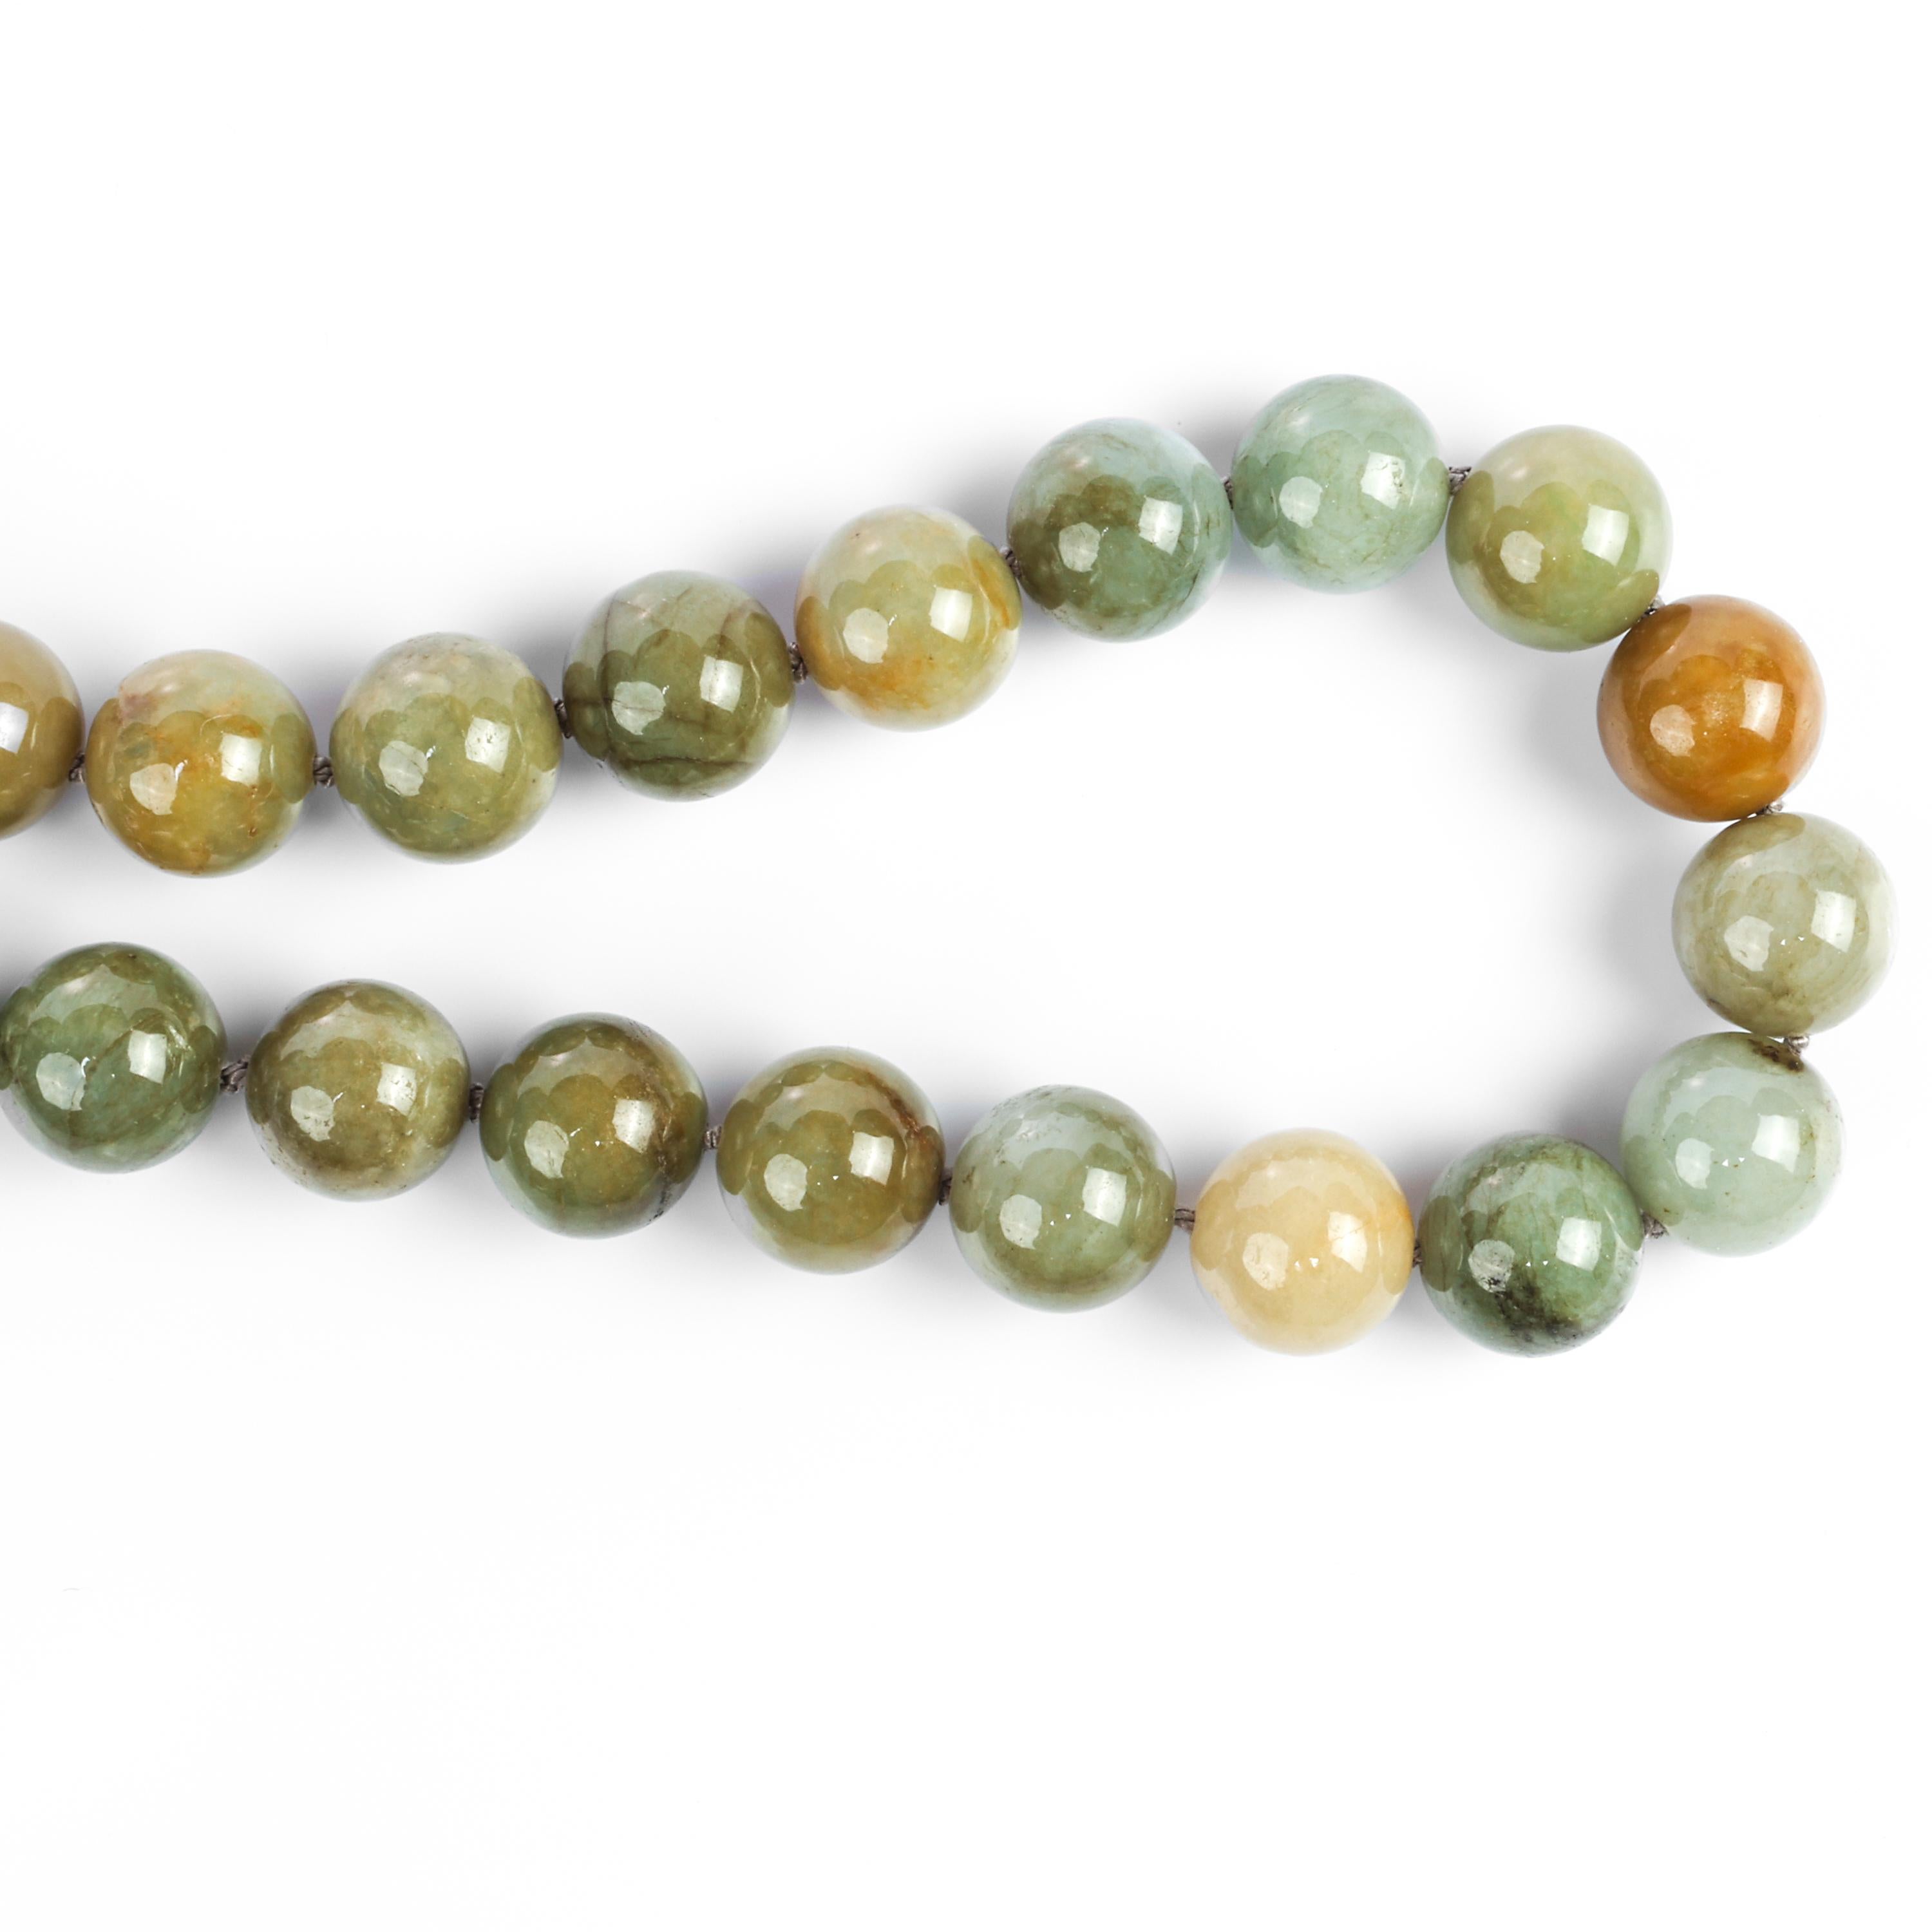 Jade Necklace Late Autumn Coloring Certified Untreated In New Condition In Southbury, CT